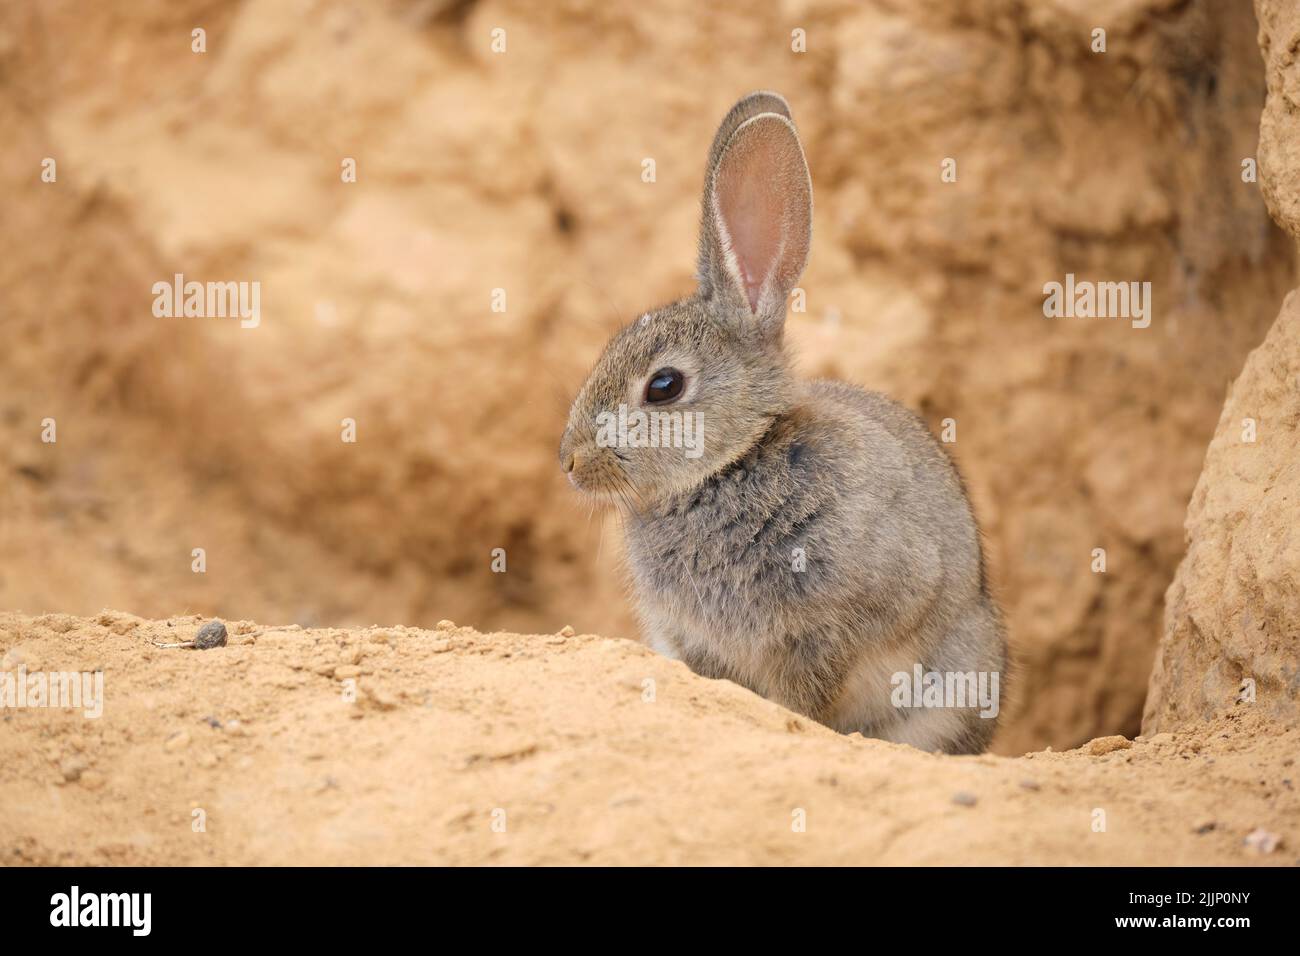 Alert desert cottontail with fluffy fur looking away while sitting near sandstone cliff in daytime Stock Photo